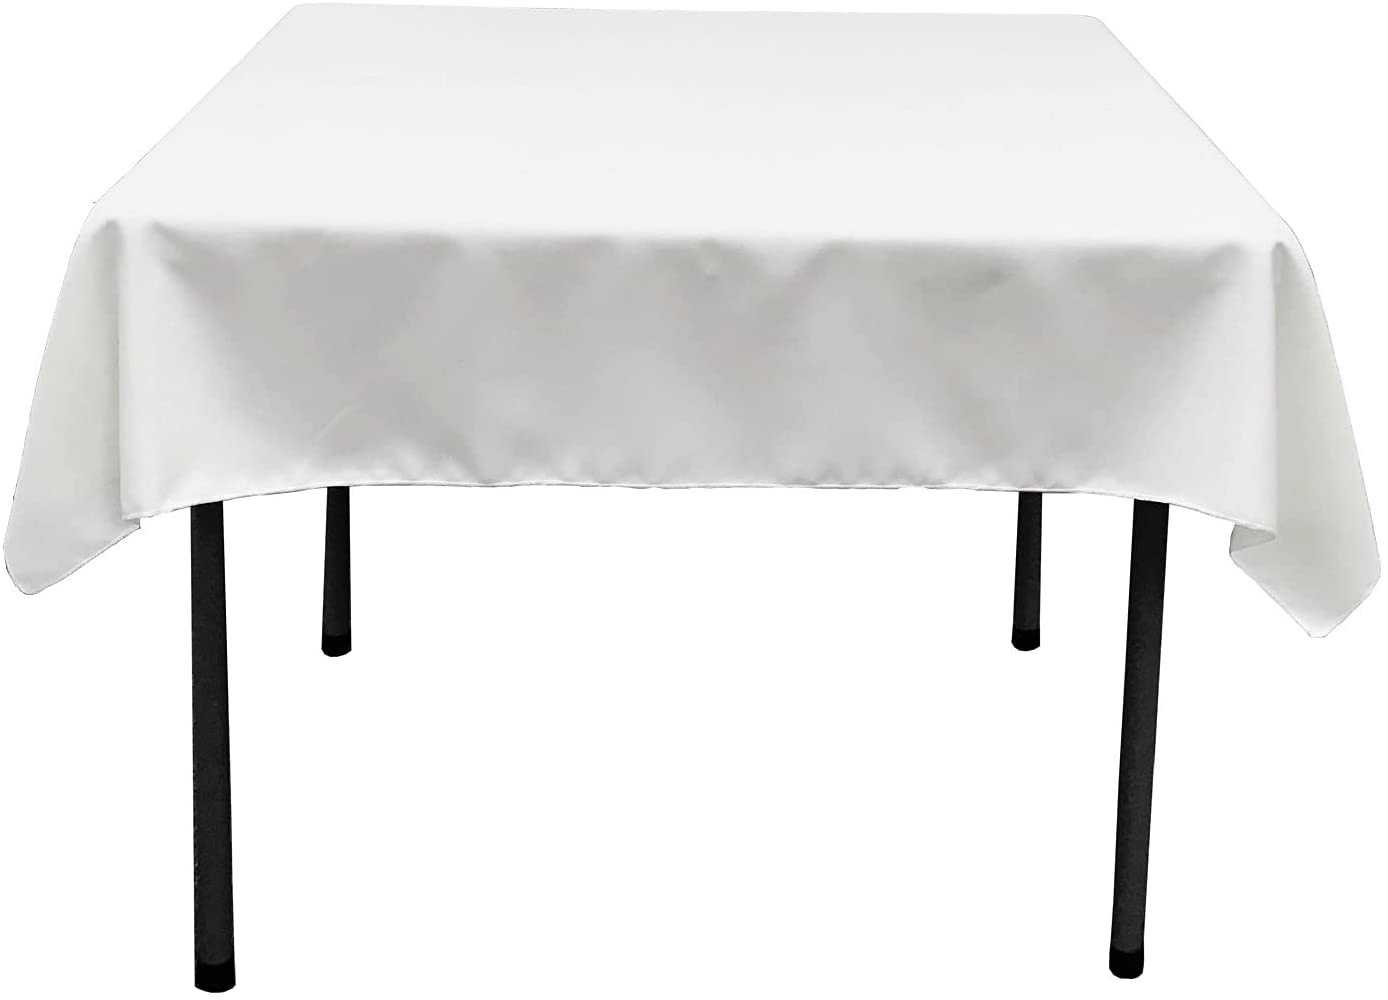 Polyester Poplin Washable Square Tablecloth, Stain and Wrinkle Resistant Table Cover White